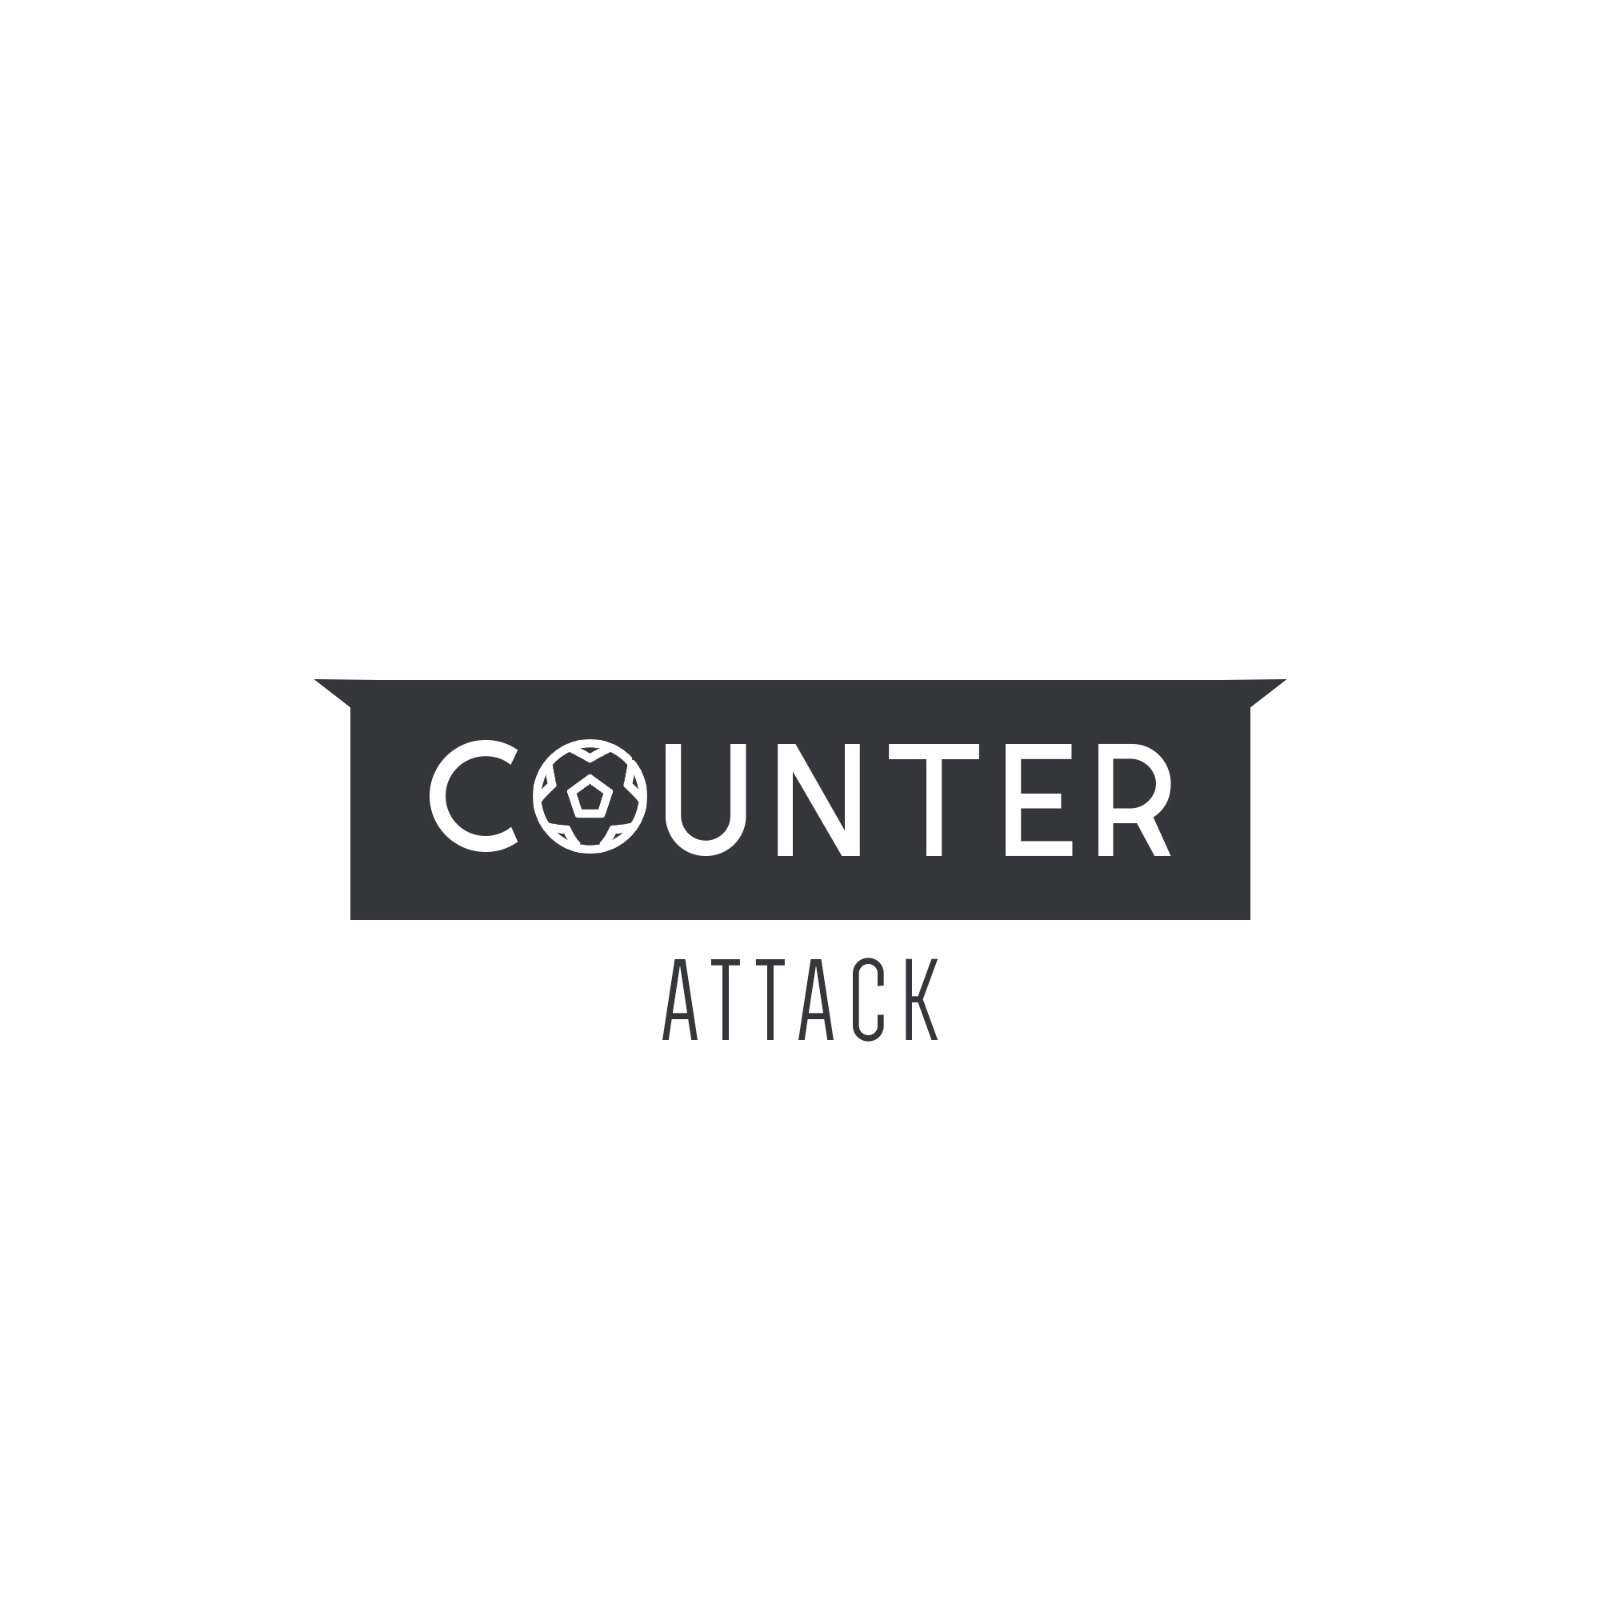 Counter Attack - Fan Chat - Good Riddance or Merci Wenger